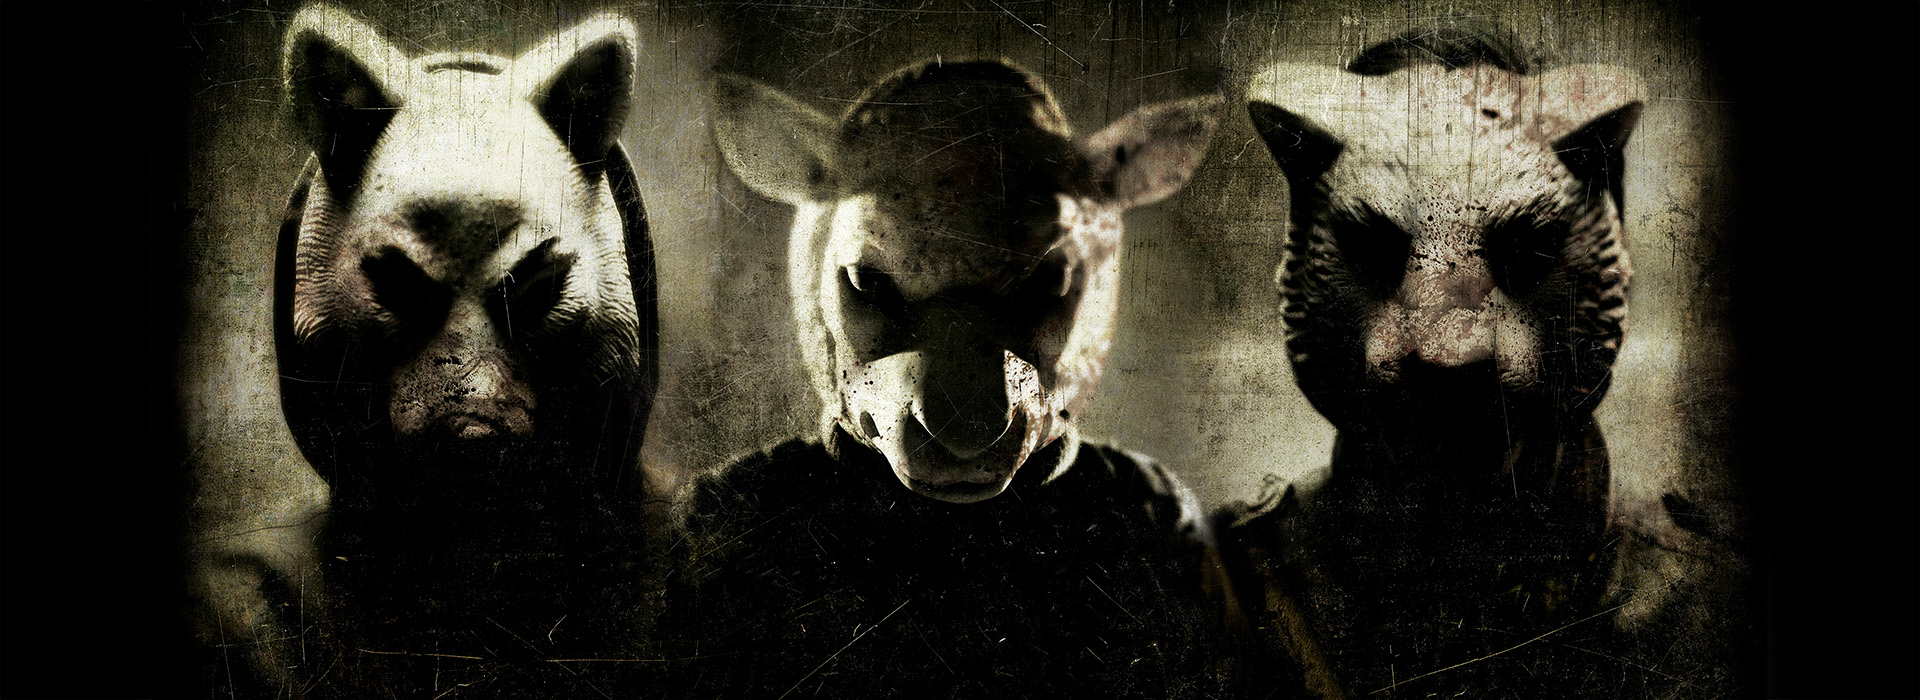 Movie poster You're Next